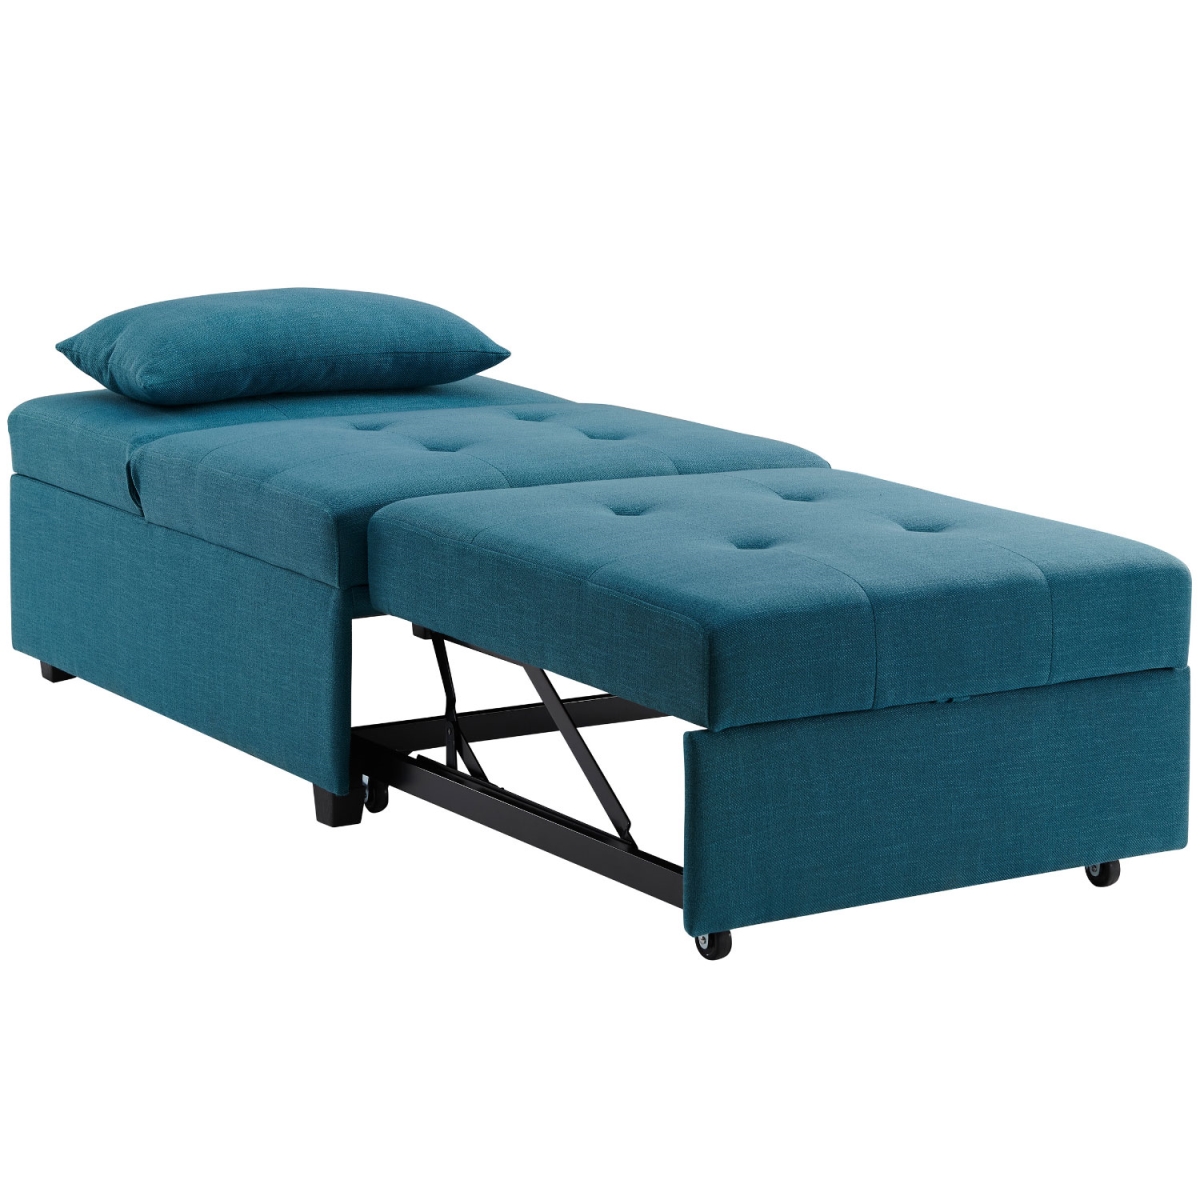 D1099s17t Boone Sofa Bed, Teal